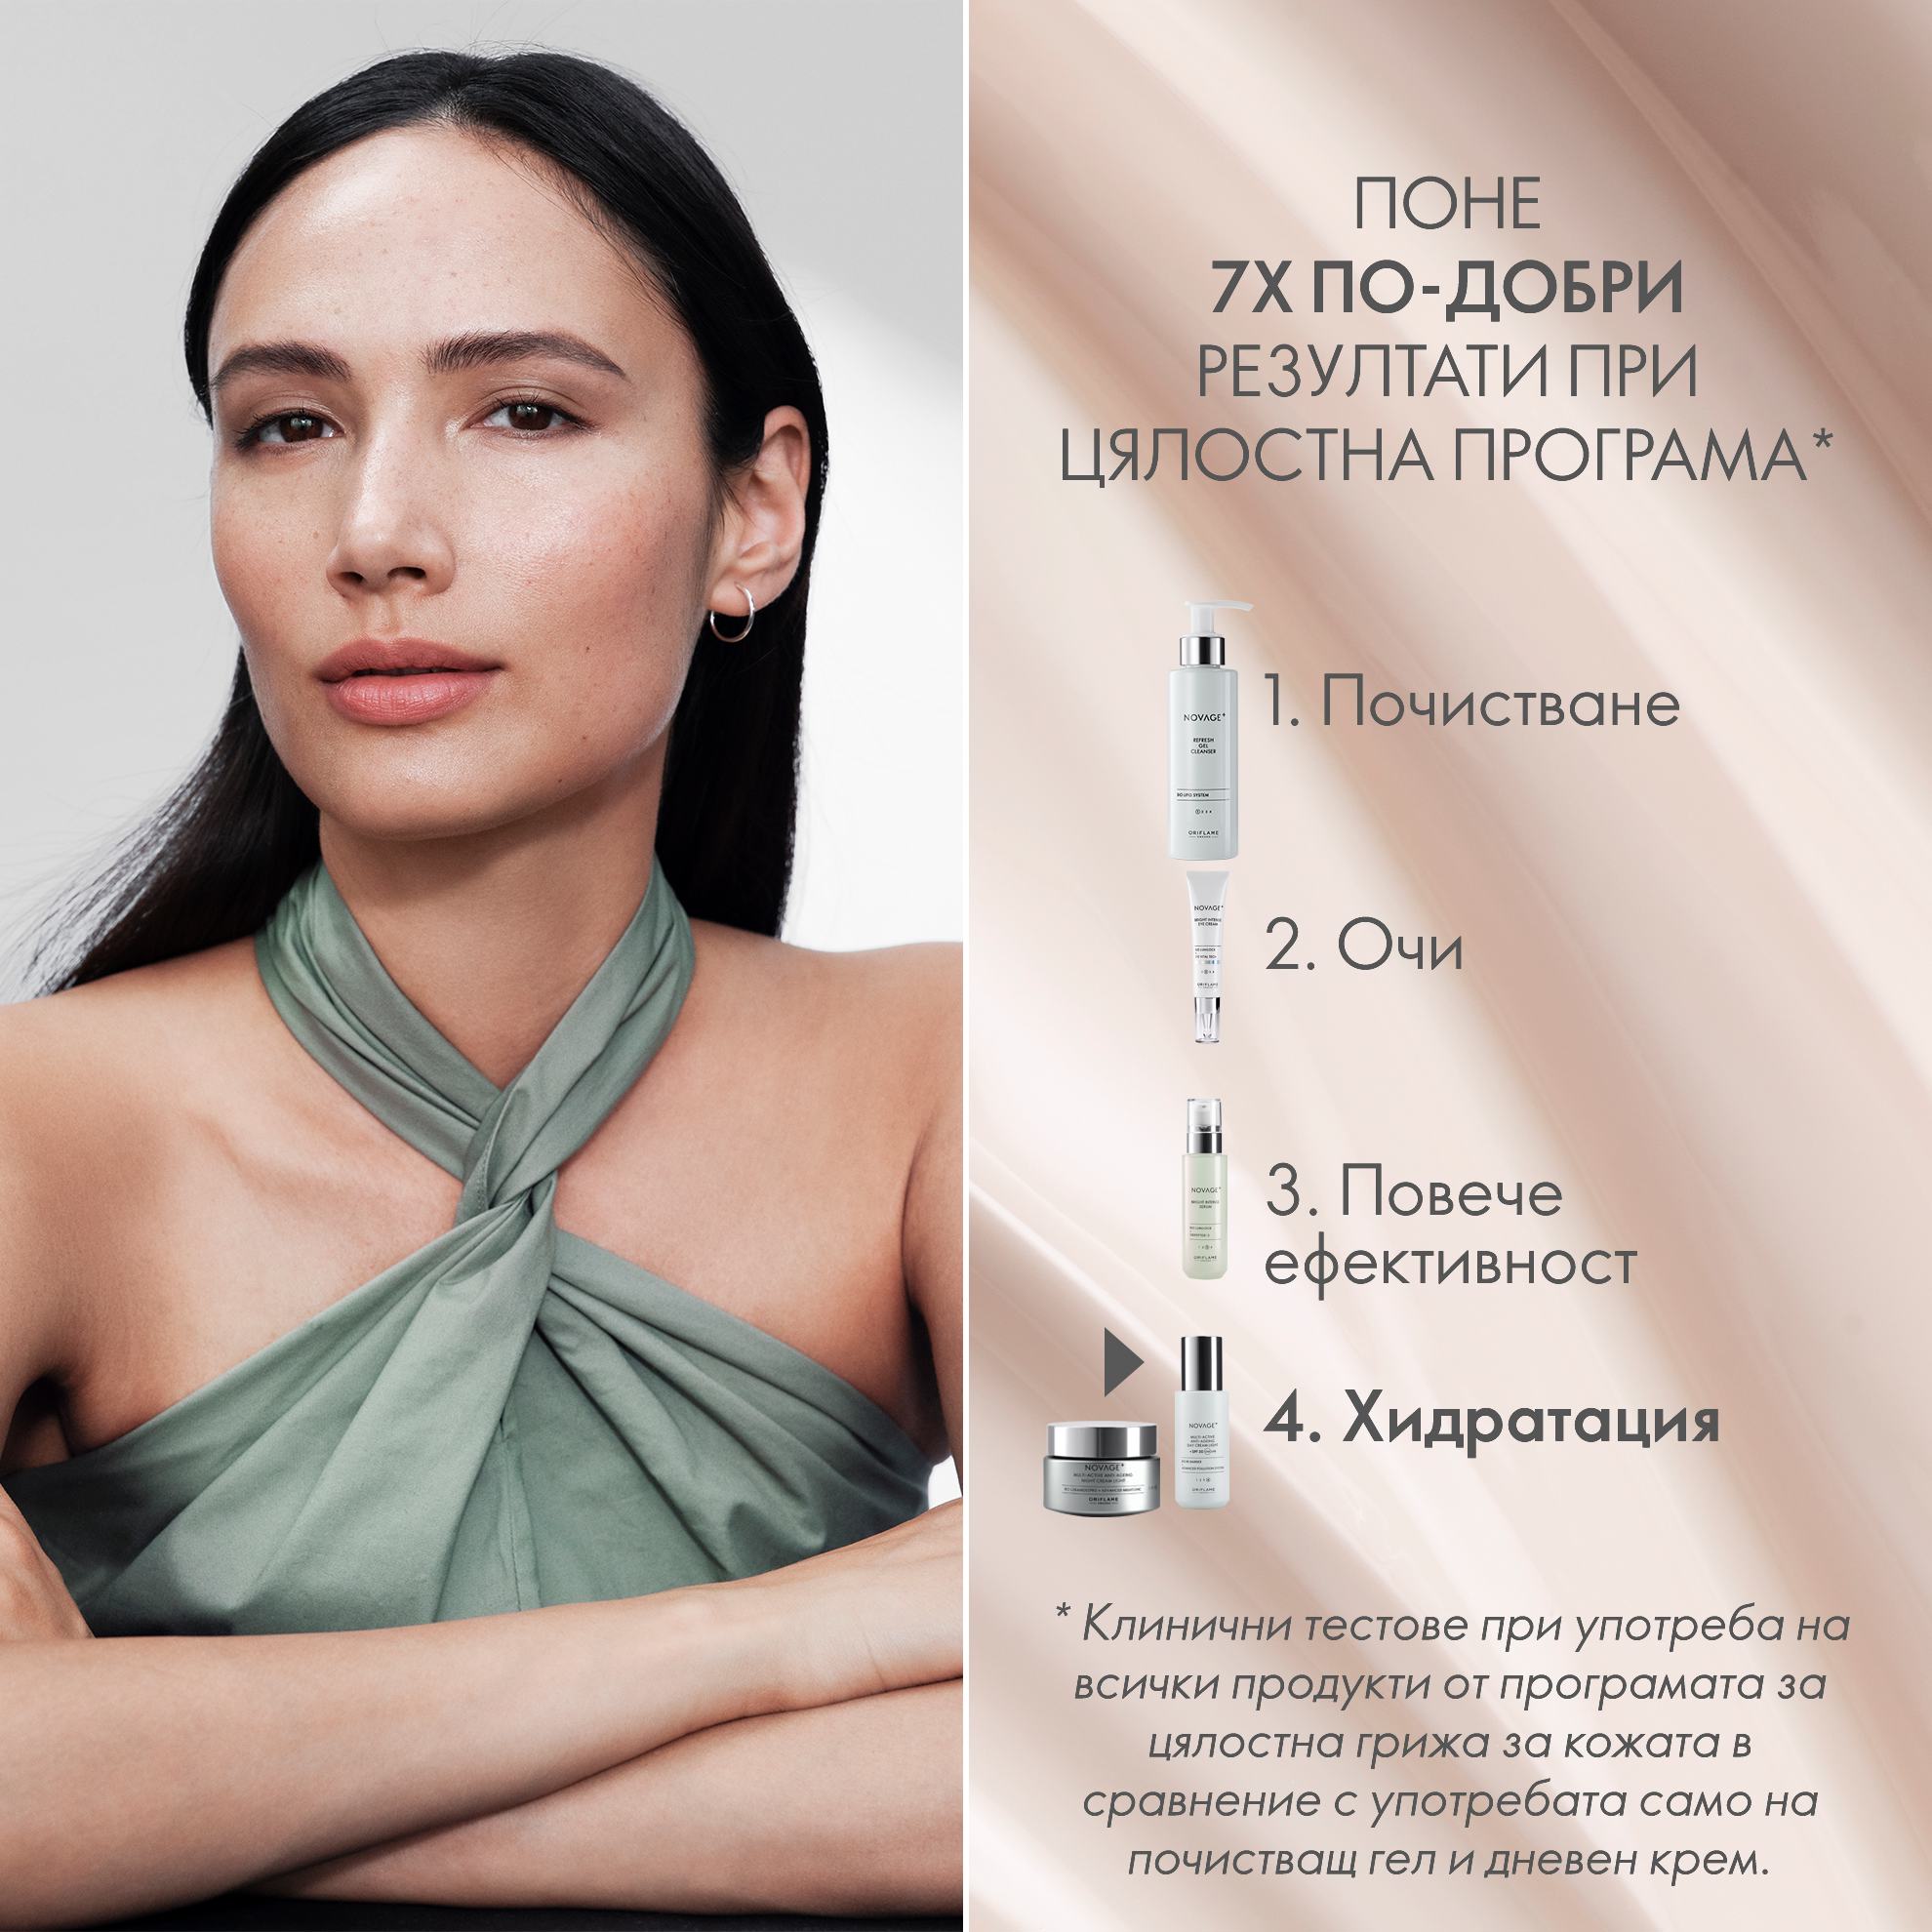 https://media-cdn.oriflame.com/productImage?externalMediaId=product-management-media%2fProducts%2f41057%2fBG%2f41057_4.png&id=17572780&version=1